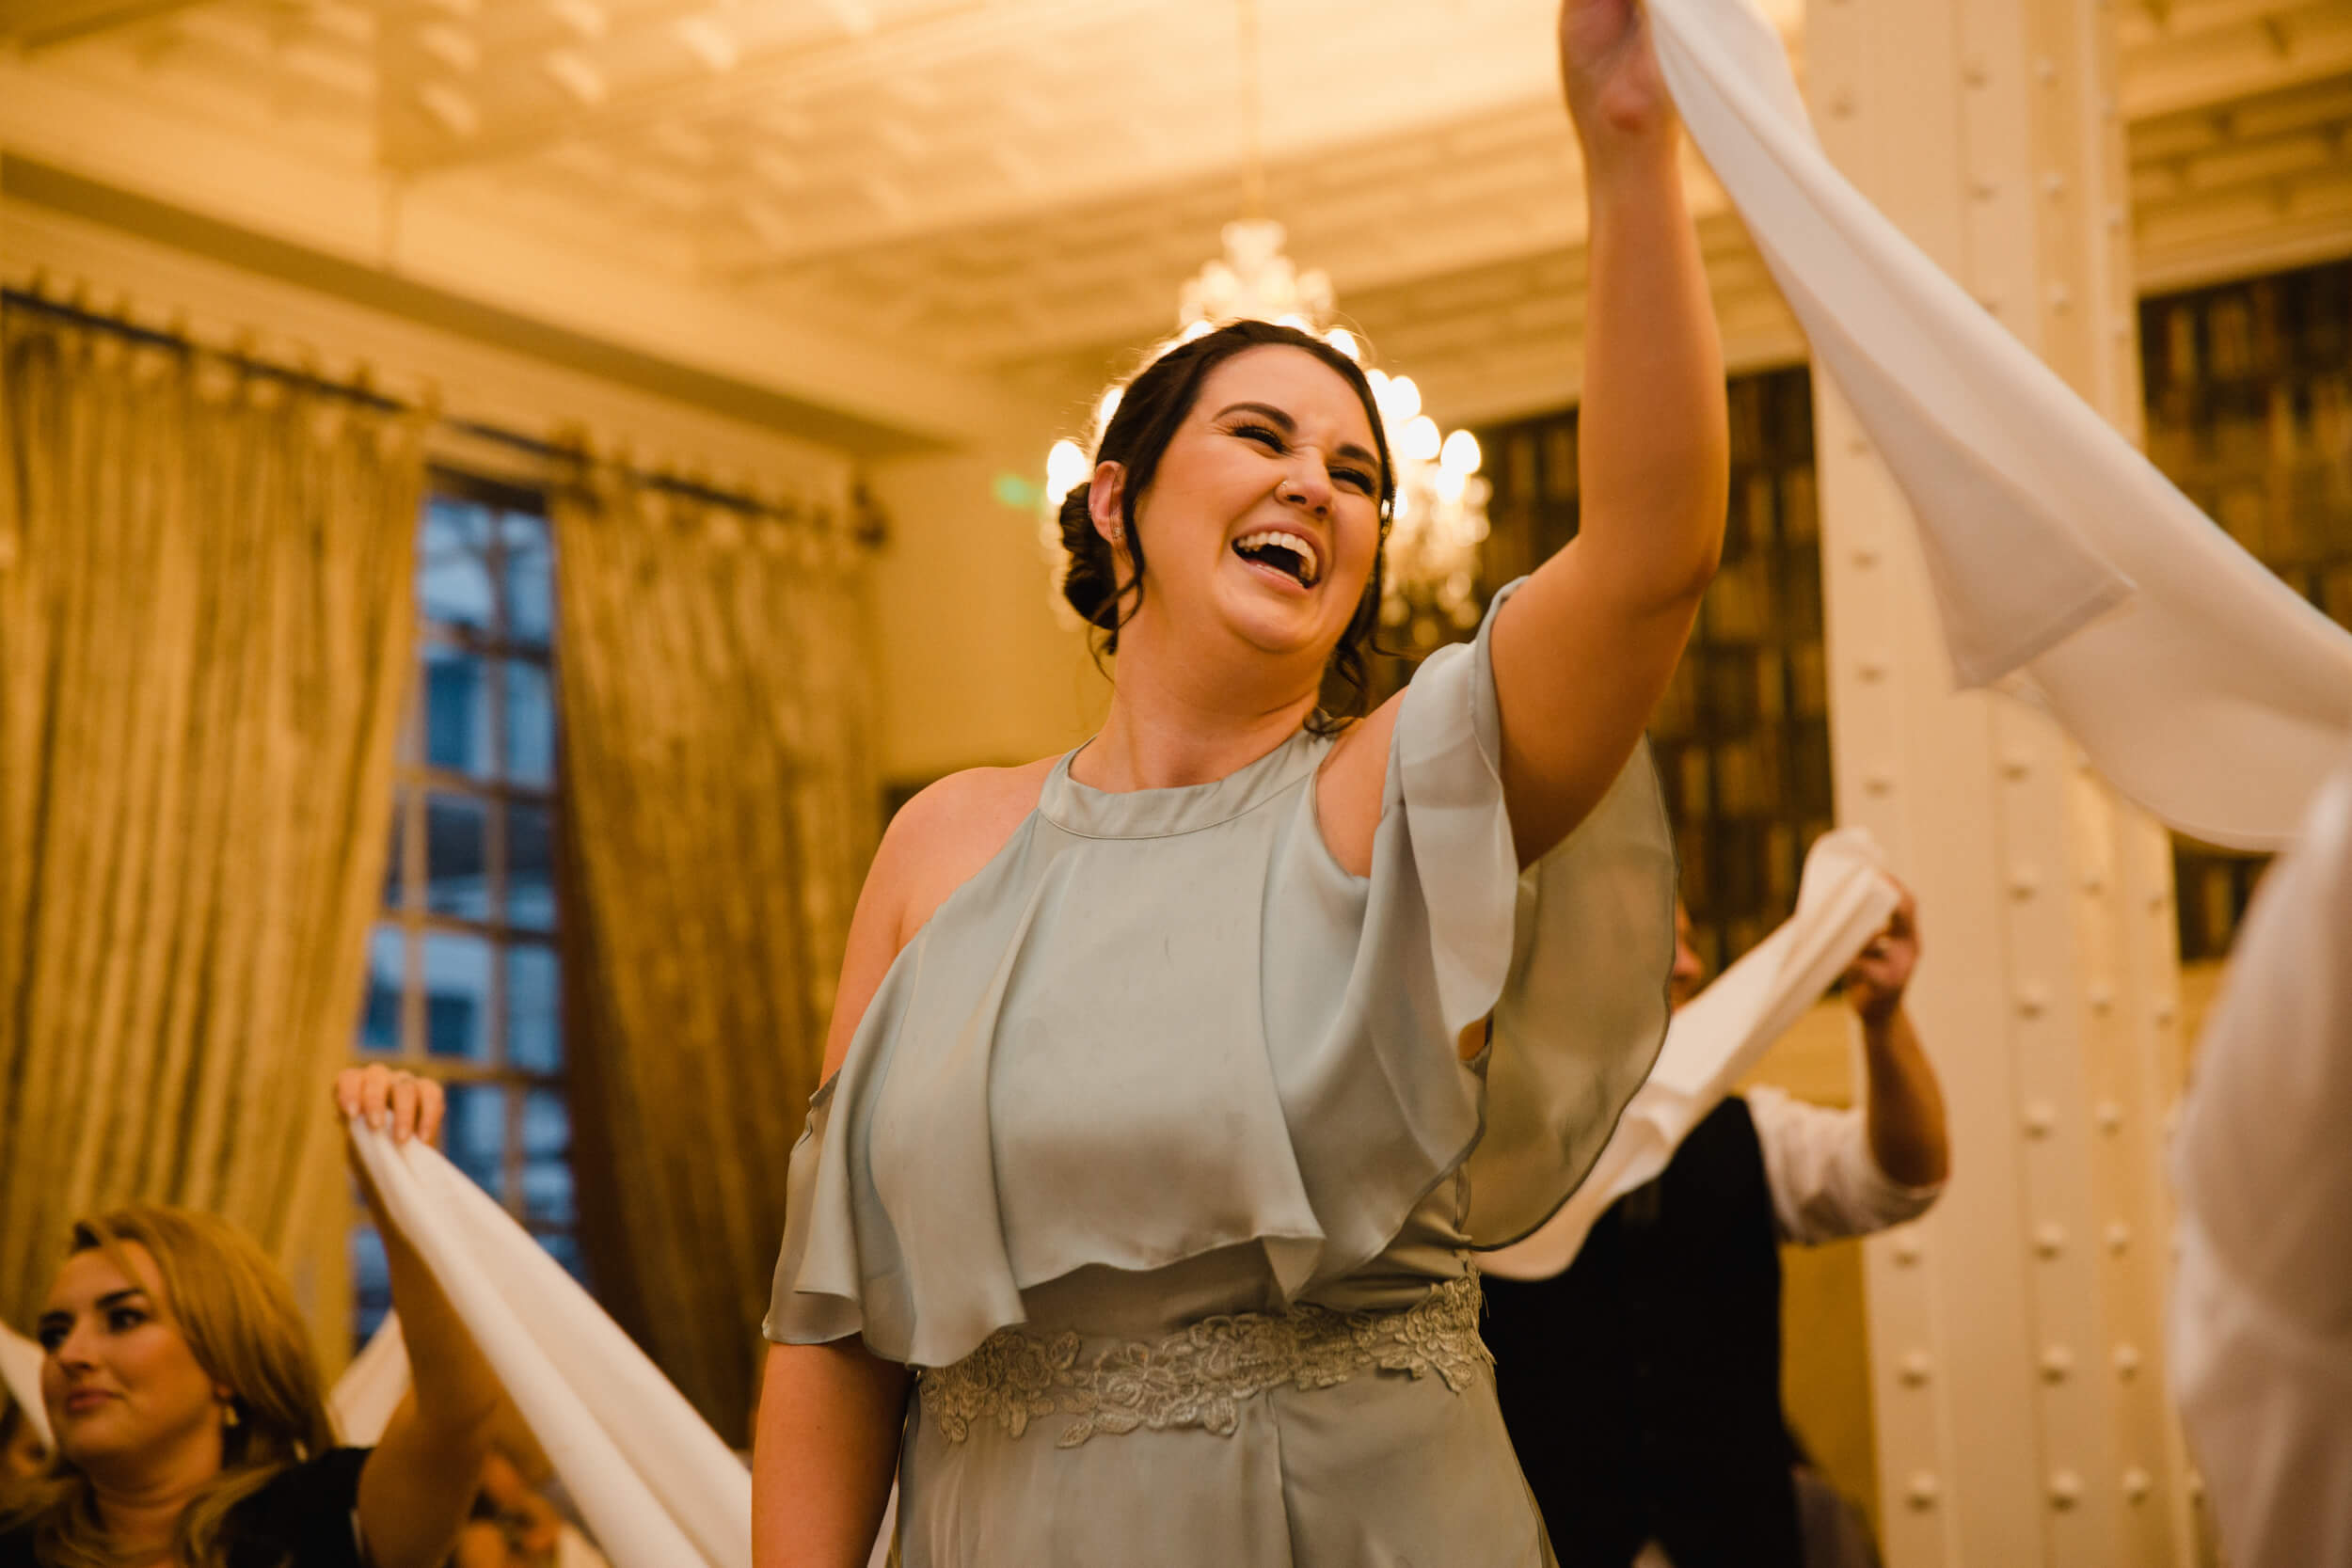 maid of honour waving napkin in the air while laughing